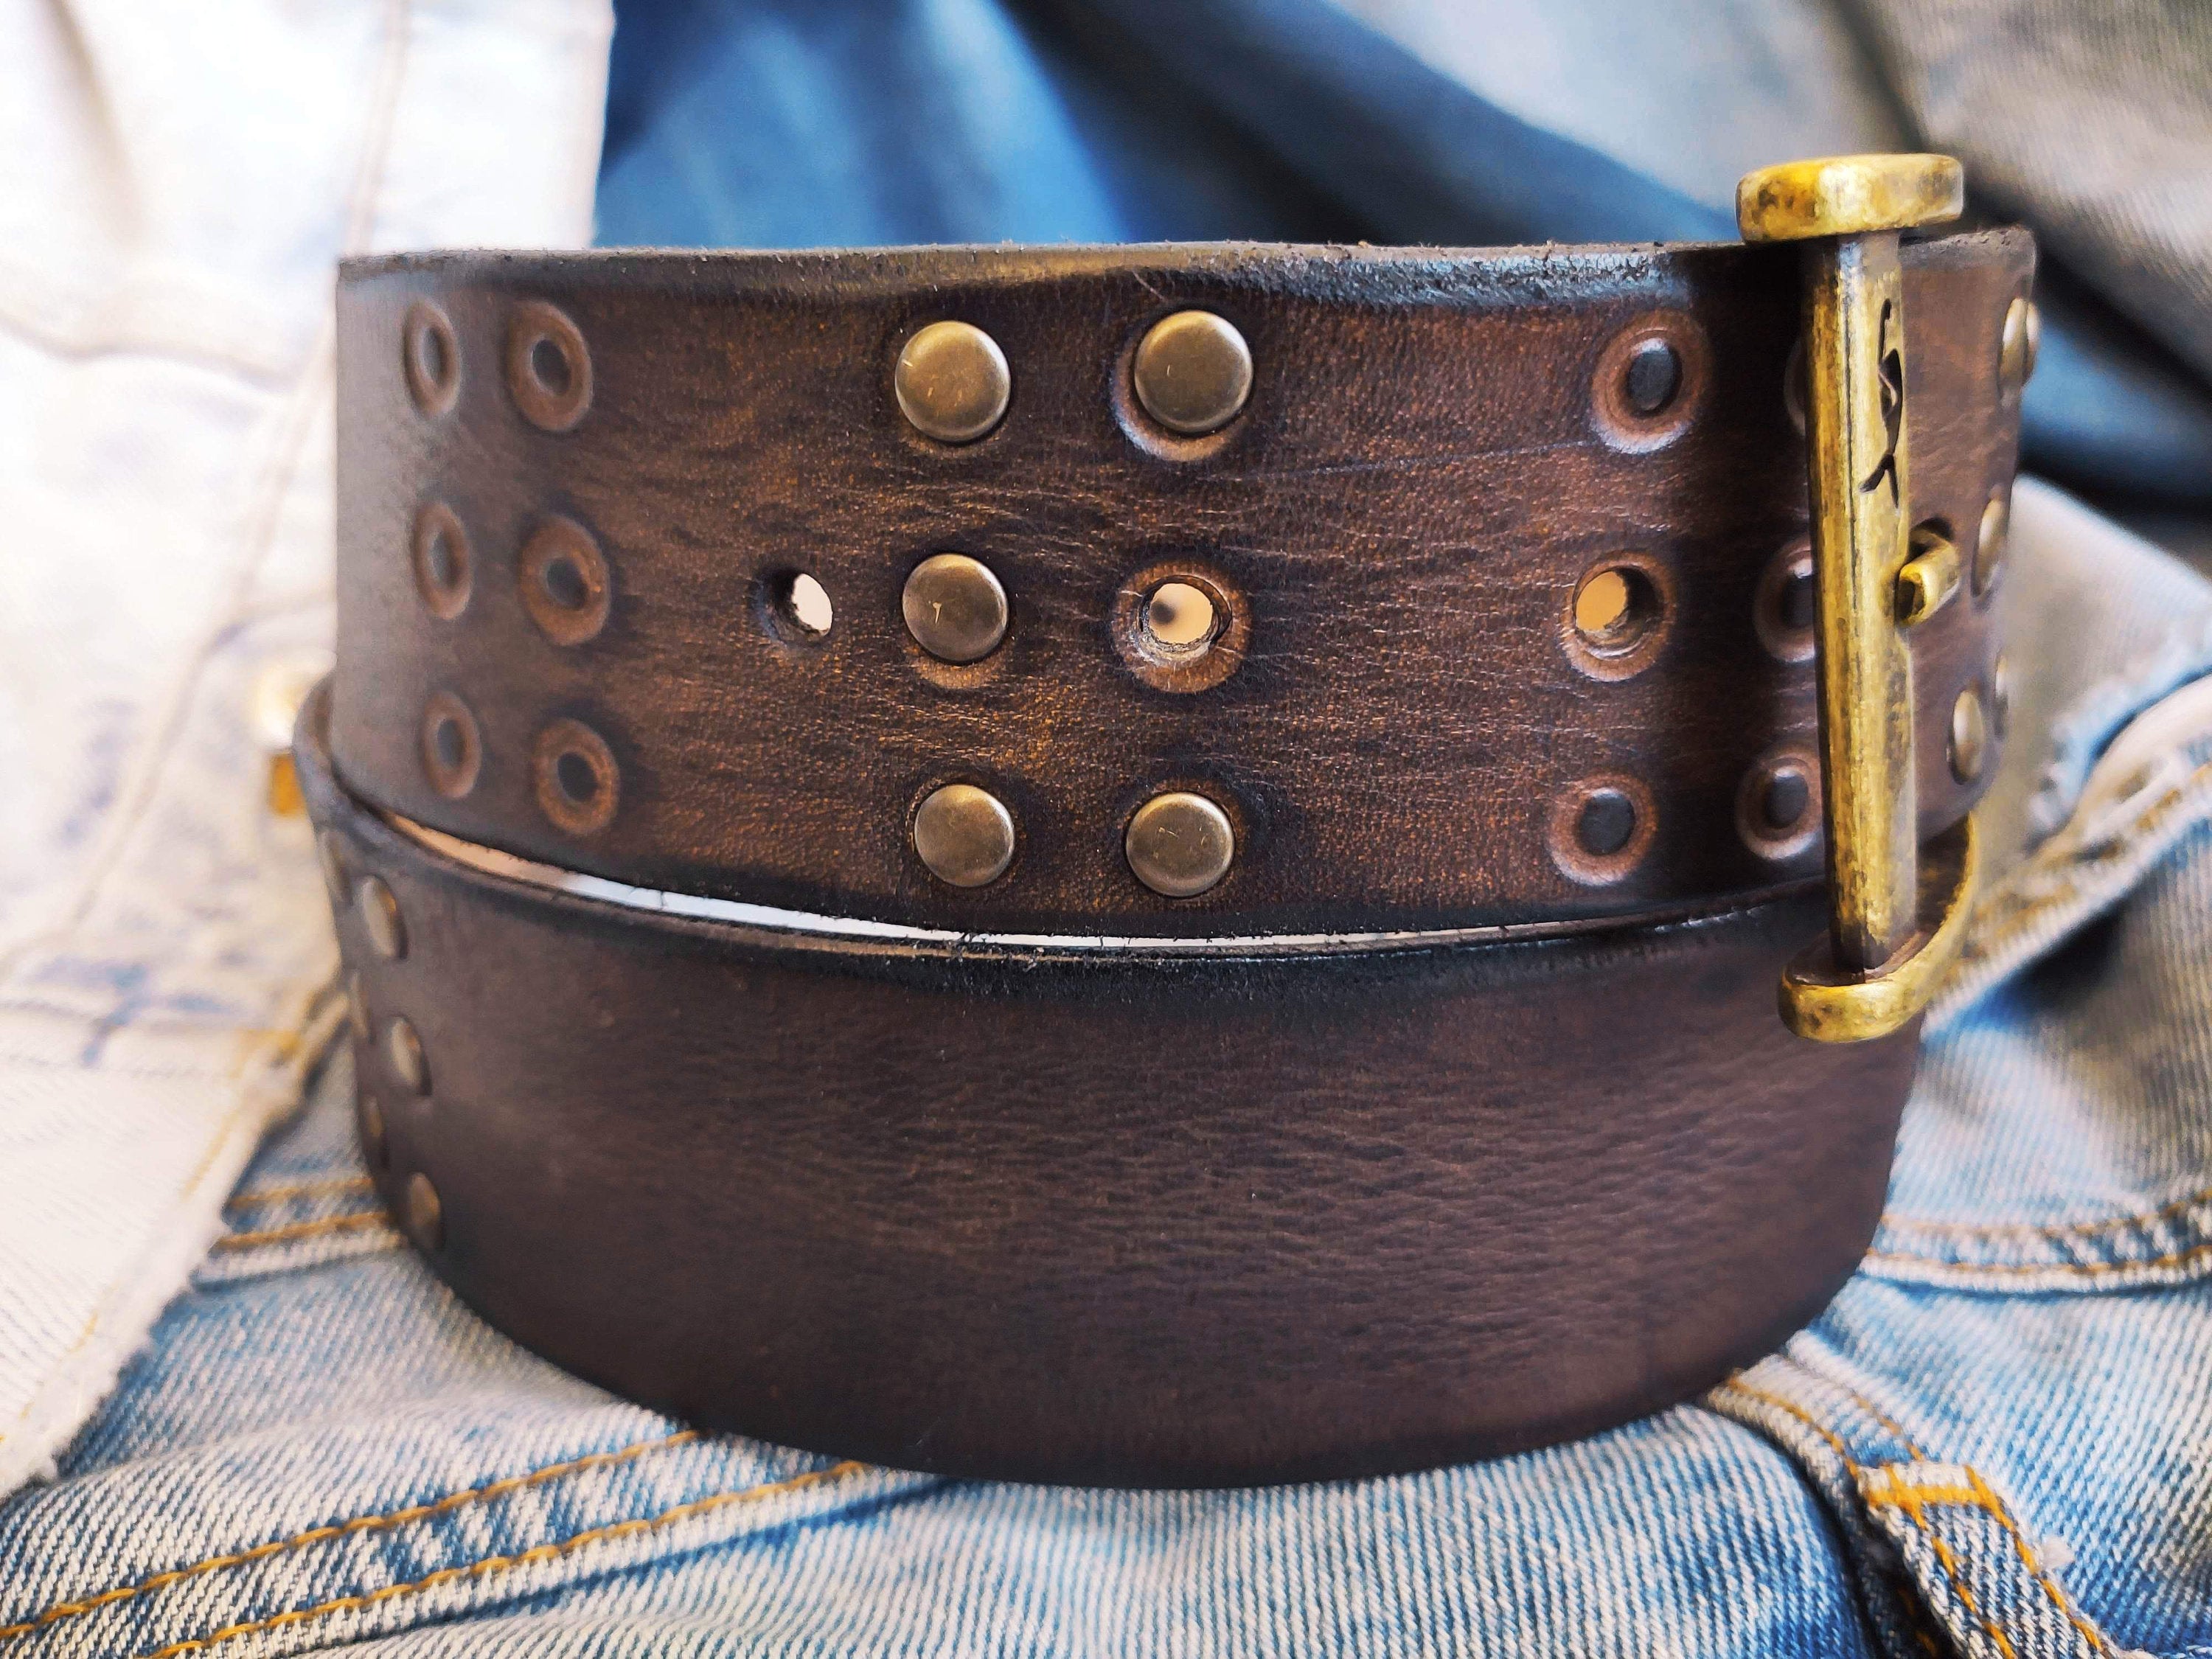 Leather Double-Prong Belt Vintage Brown